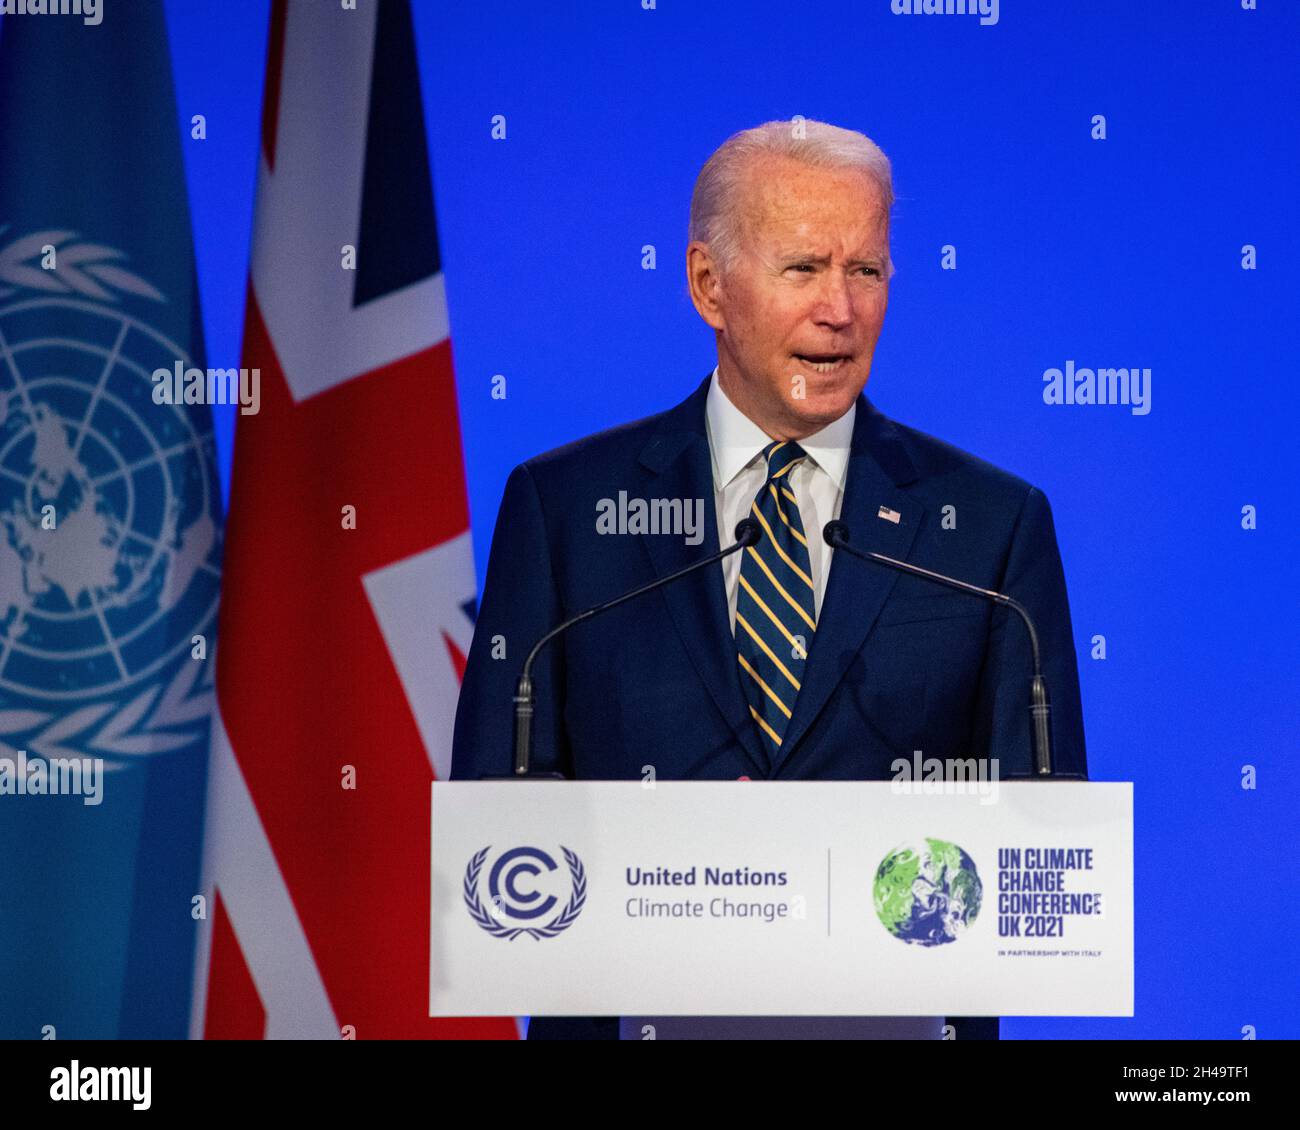 Glasgow, Scotland, UK. 1st Nov, 2021. PICTURED: Joe Biden, 46th President of the United States of America seen addressing the COP26 Climate Change Conference. Credit: Colin Fisher/Alamy Live News Stock Photo